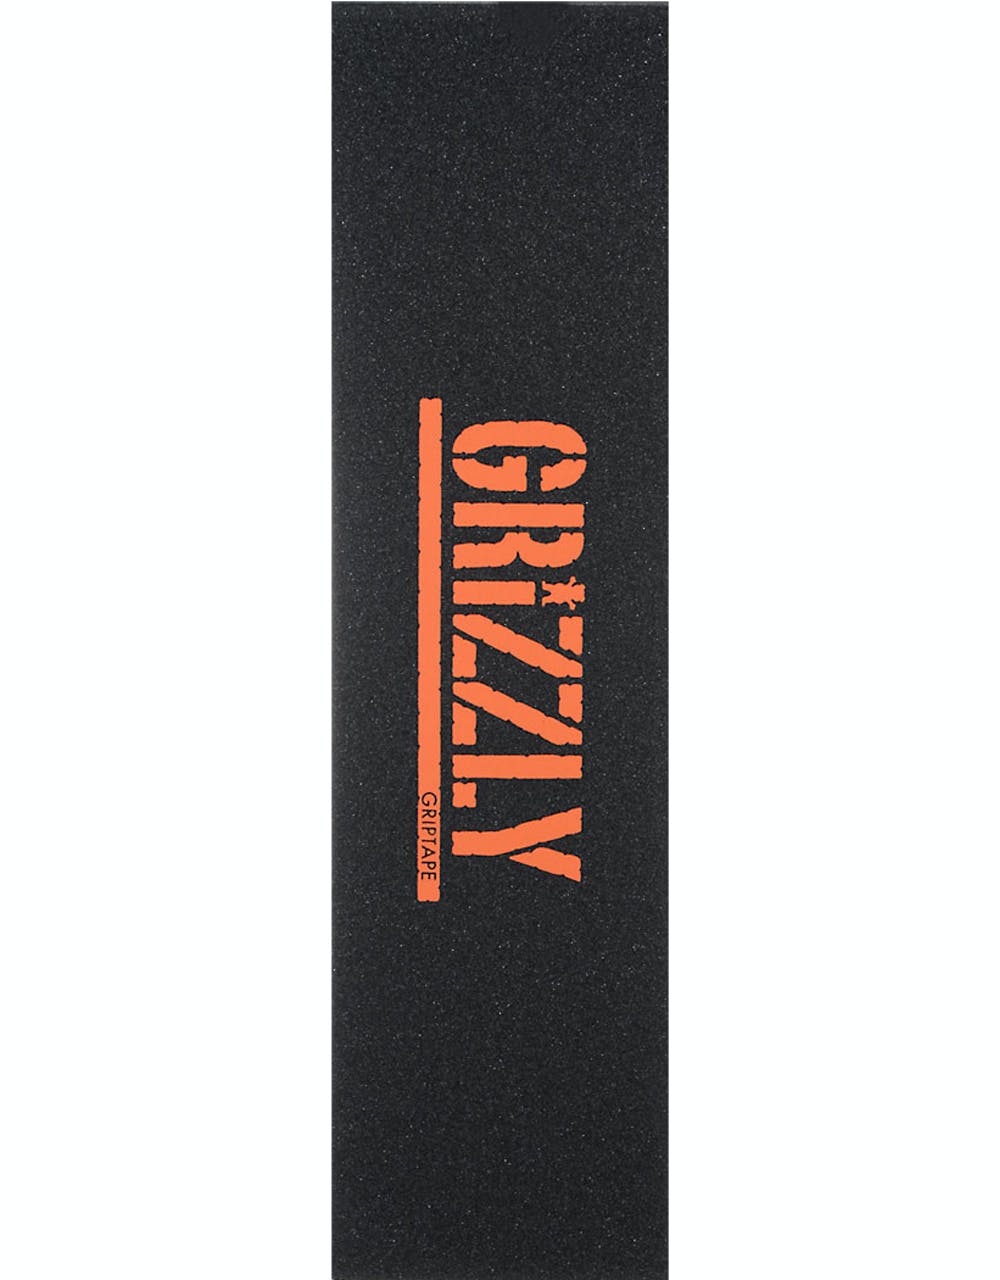 Grizzly Stamp Grip Tape Sheet